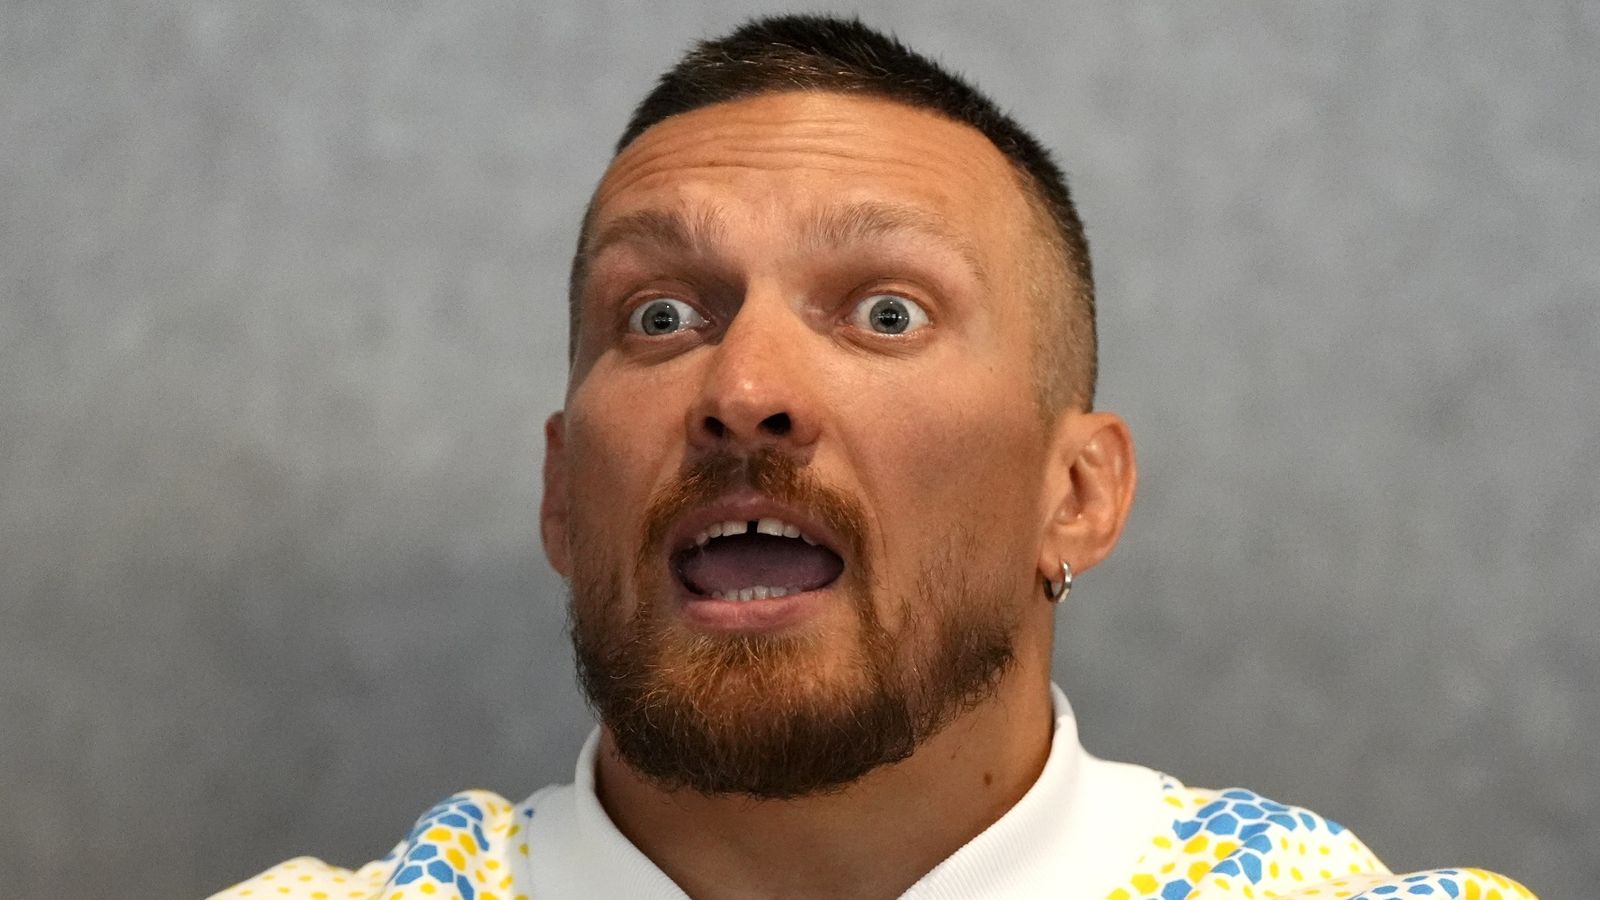 Fury vs Usyk: Oleksandr Usyk reveals how he called off his team to stop a brawl after Fury fracas | Boxing News